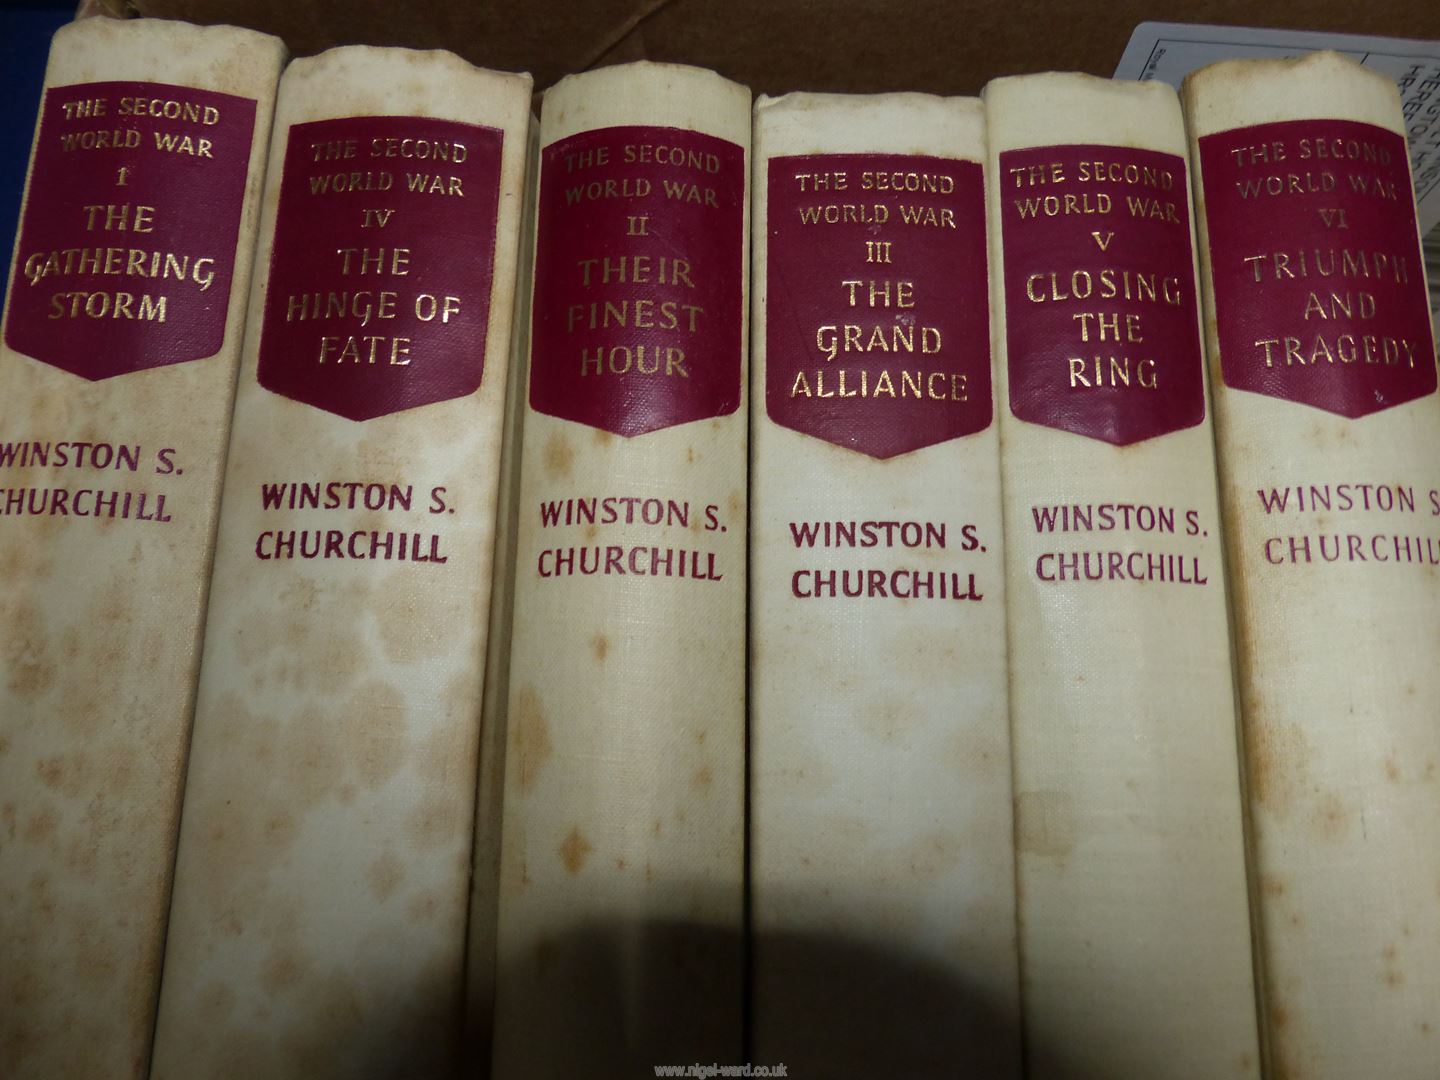 Six volumes of The Second World War by Winston S. Churchill, reprint society 1956. - Image 2 of 2